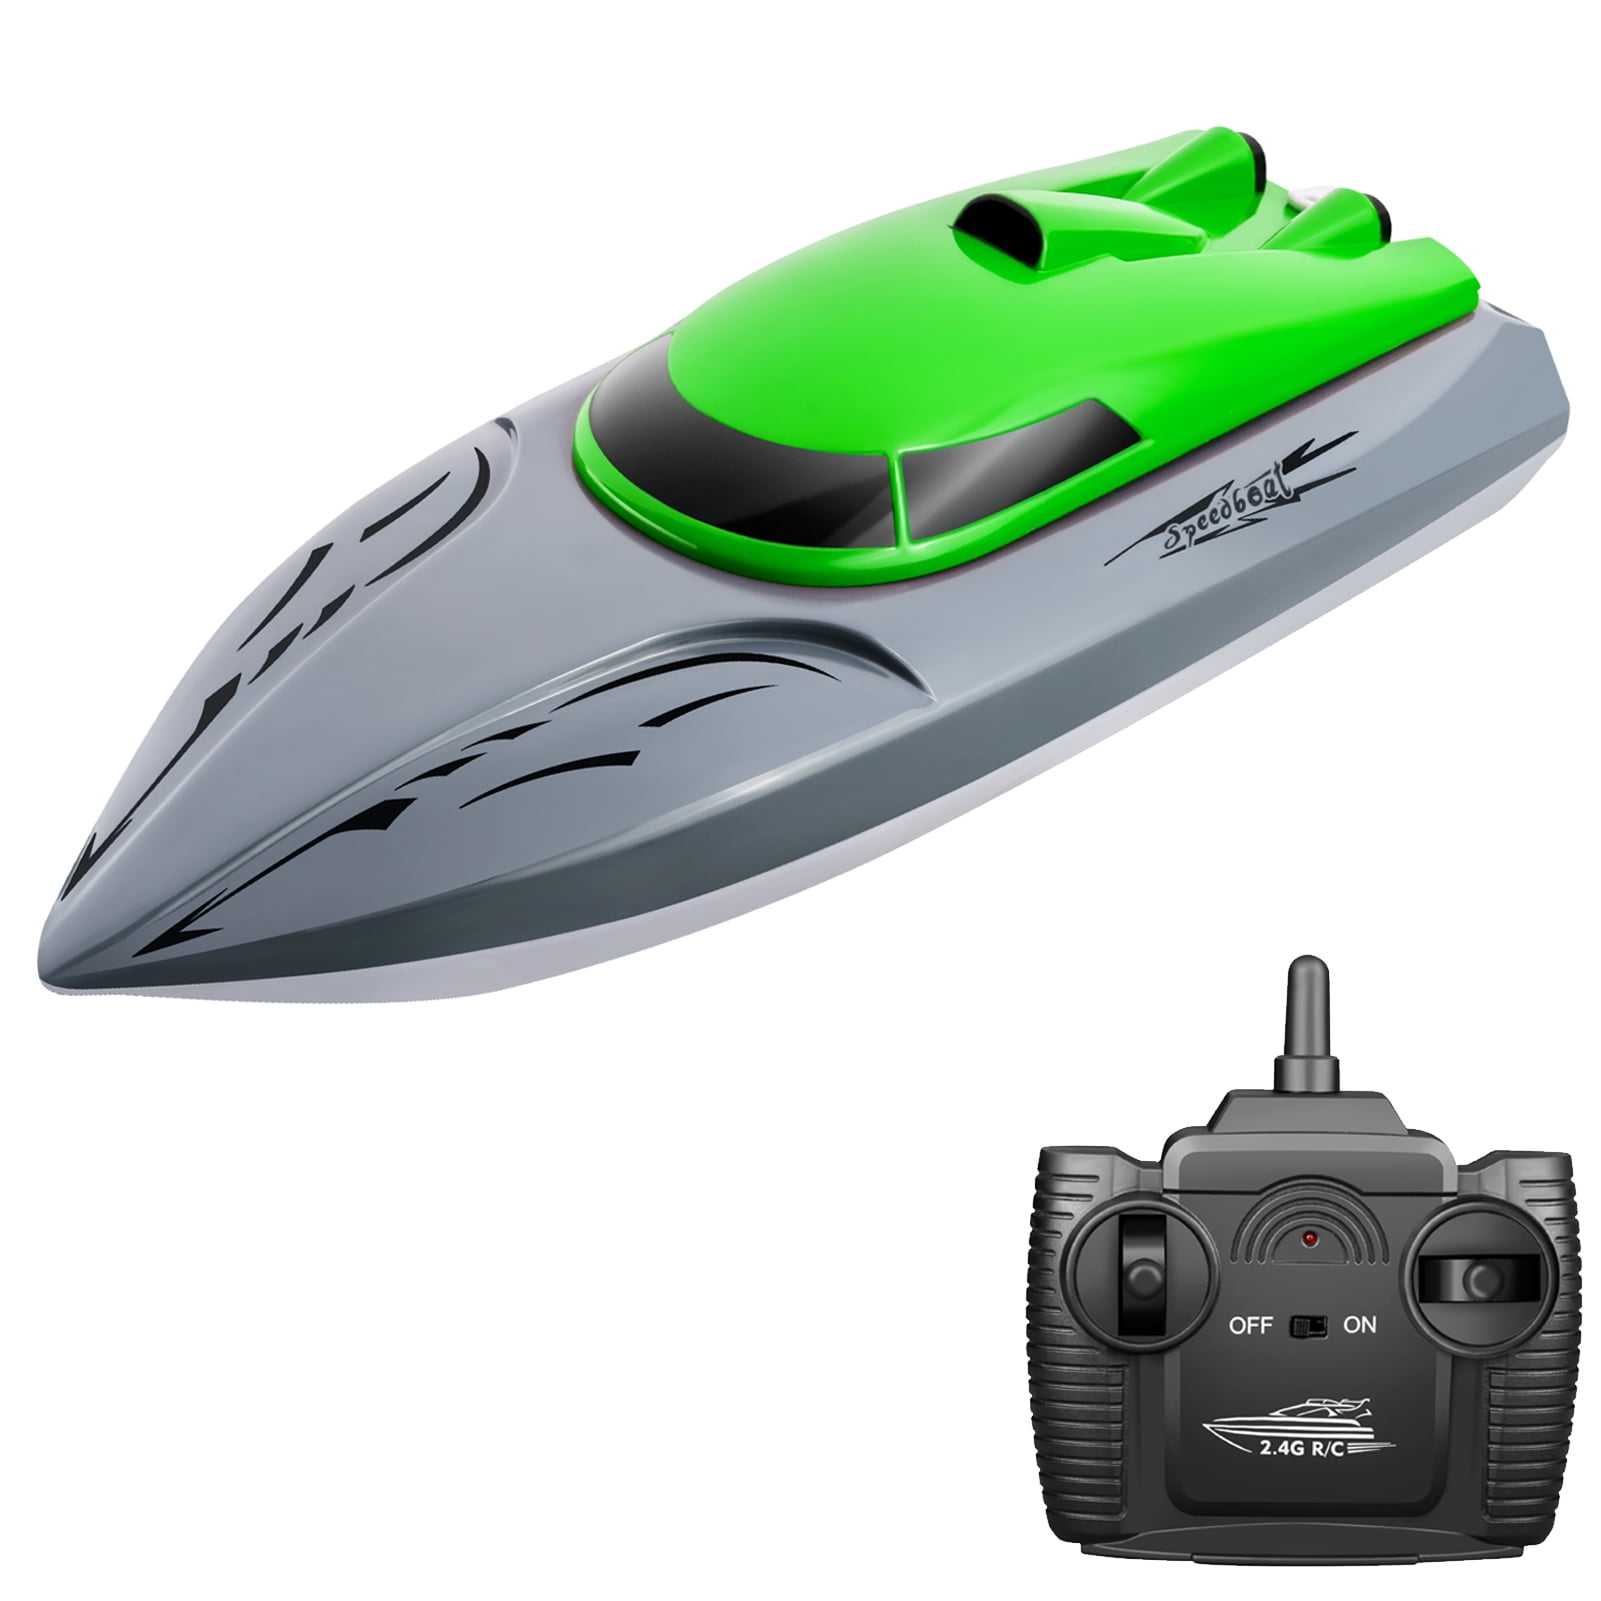 Over Reach Alarm 2.4GHz 25km/h High Speed RC Boat Electric Racing Boat Toy Gift 